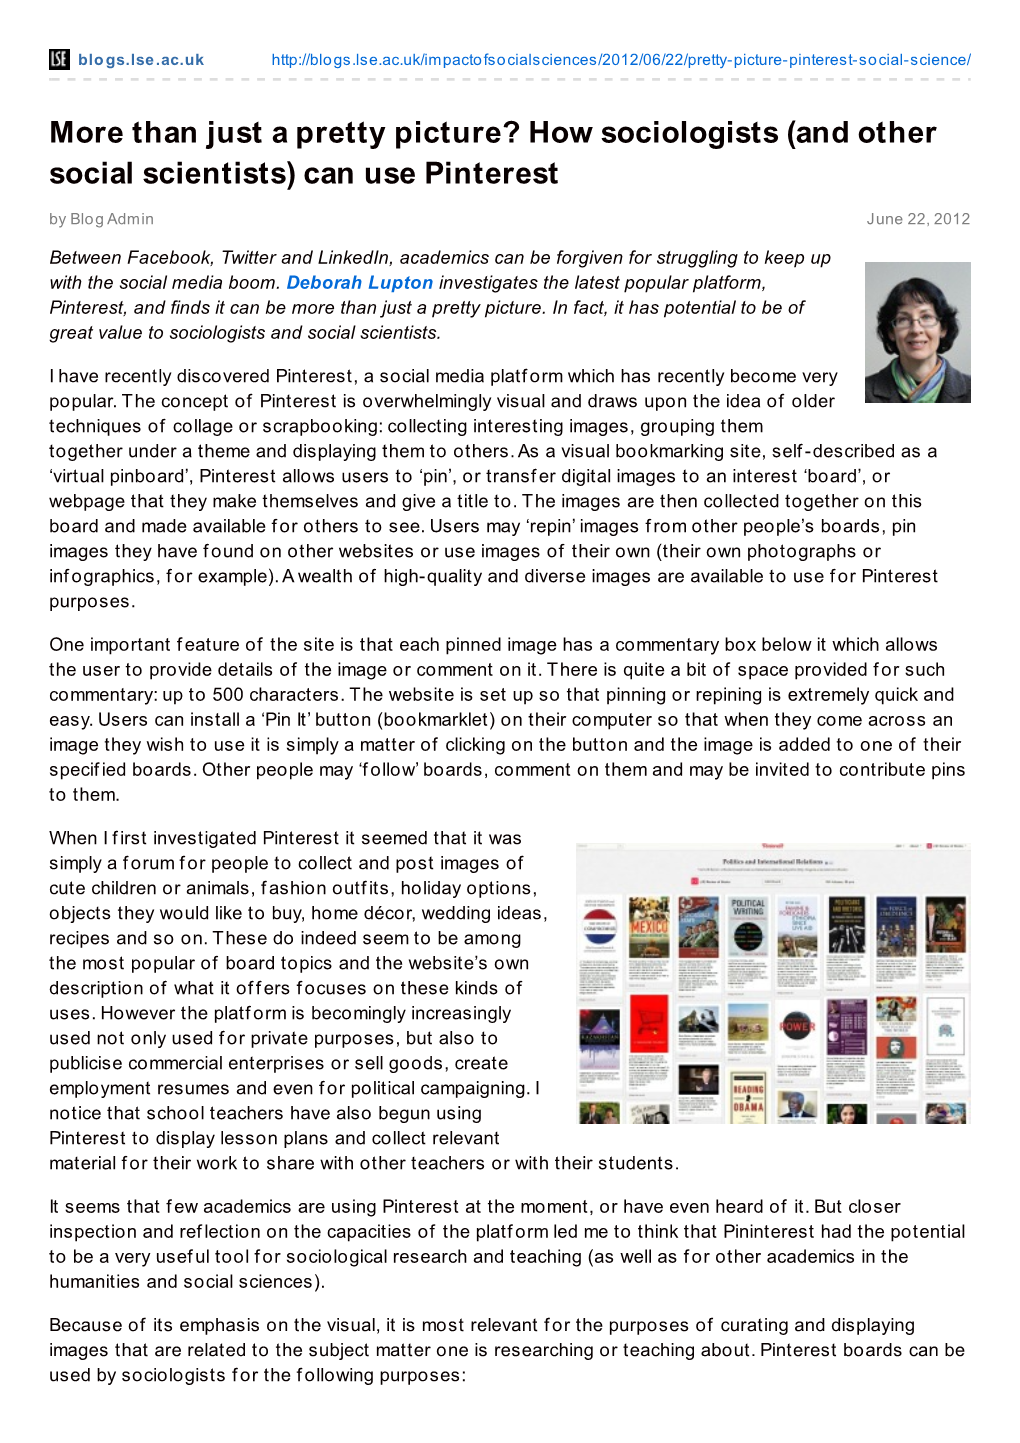 How Sociologists (And Other Social Scientists) Can Use Pinterest by Blog Admin June 22, 2012